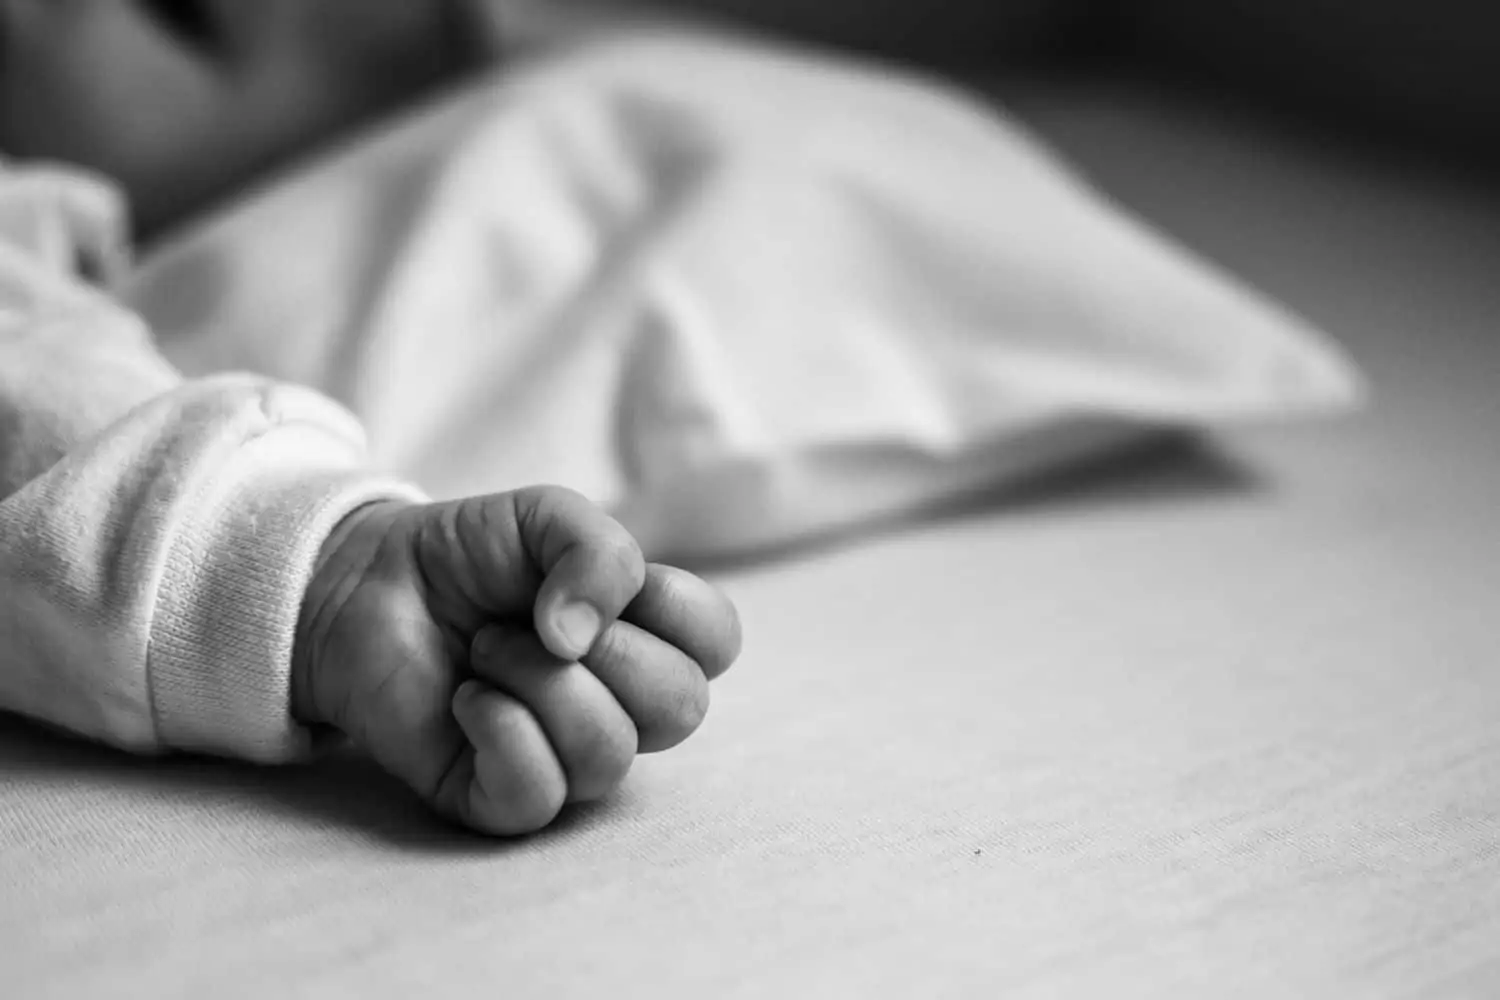 Six-day old infant baby kidnapped in Durban